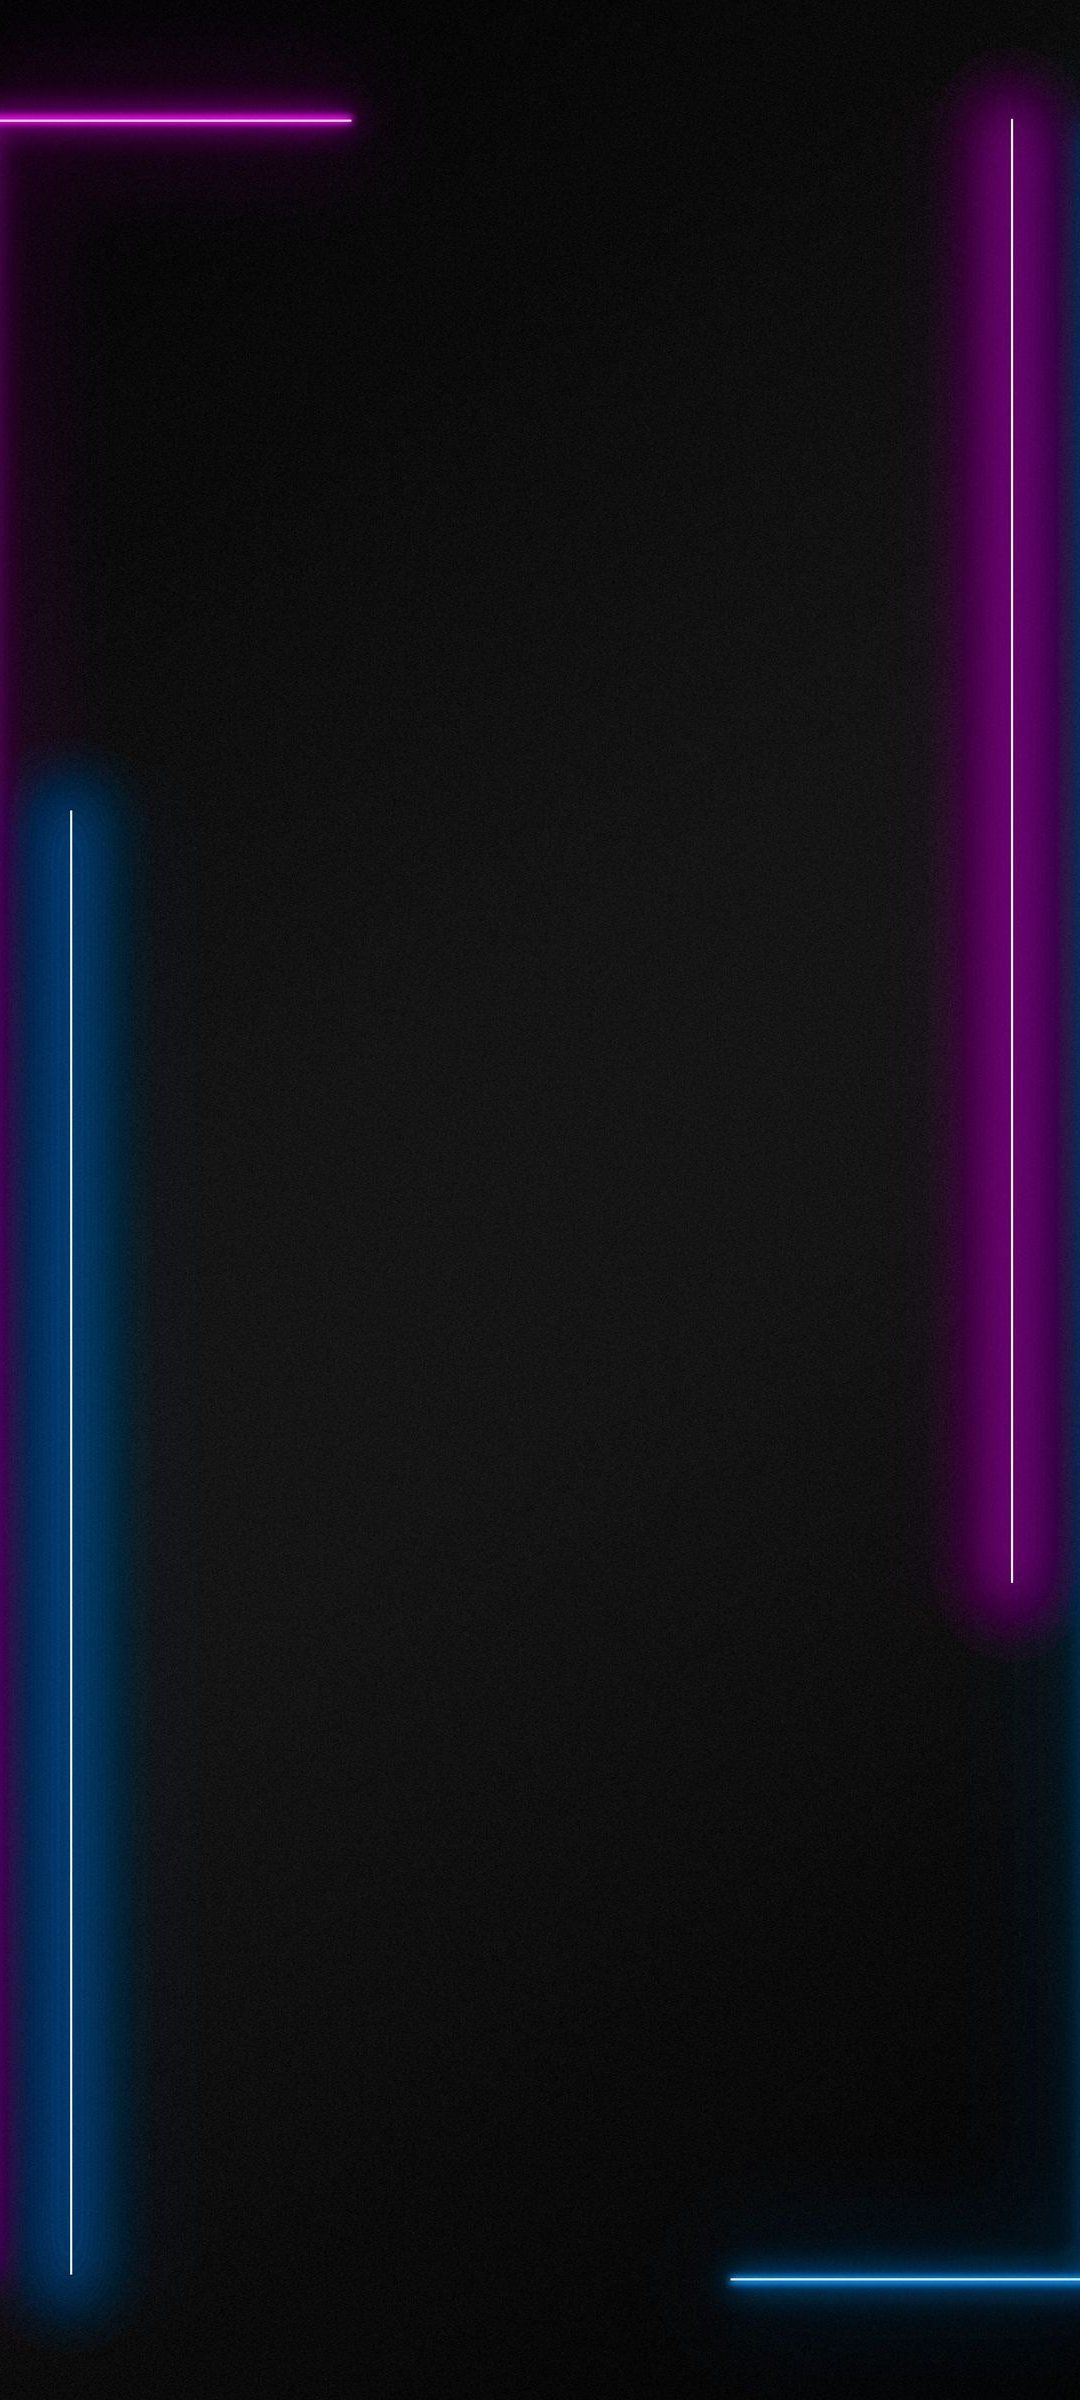 Neon Border Amoled Black Wallpaper  S08  Chillout Wallpapers